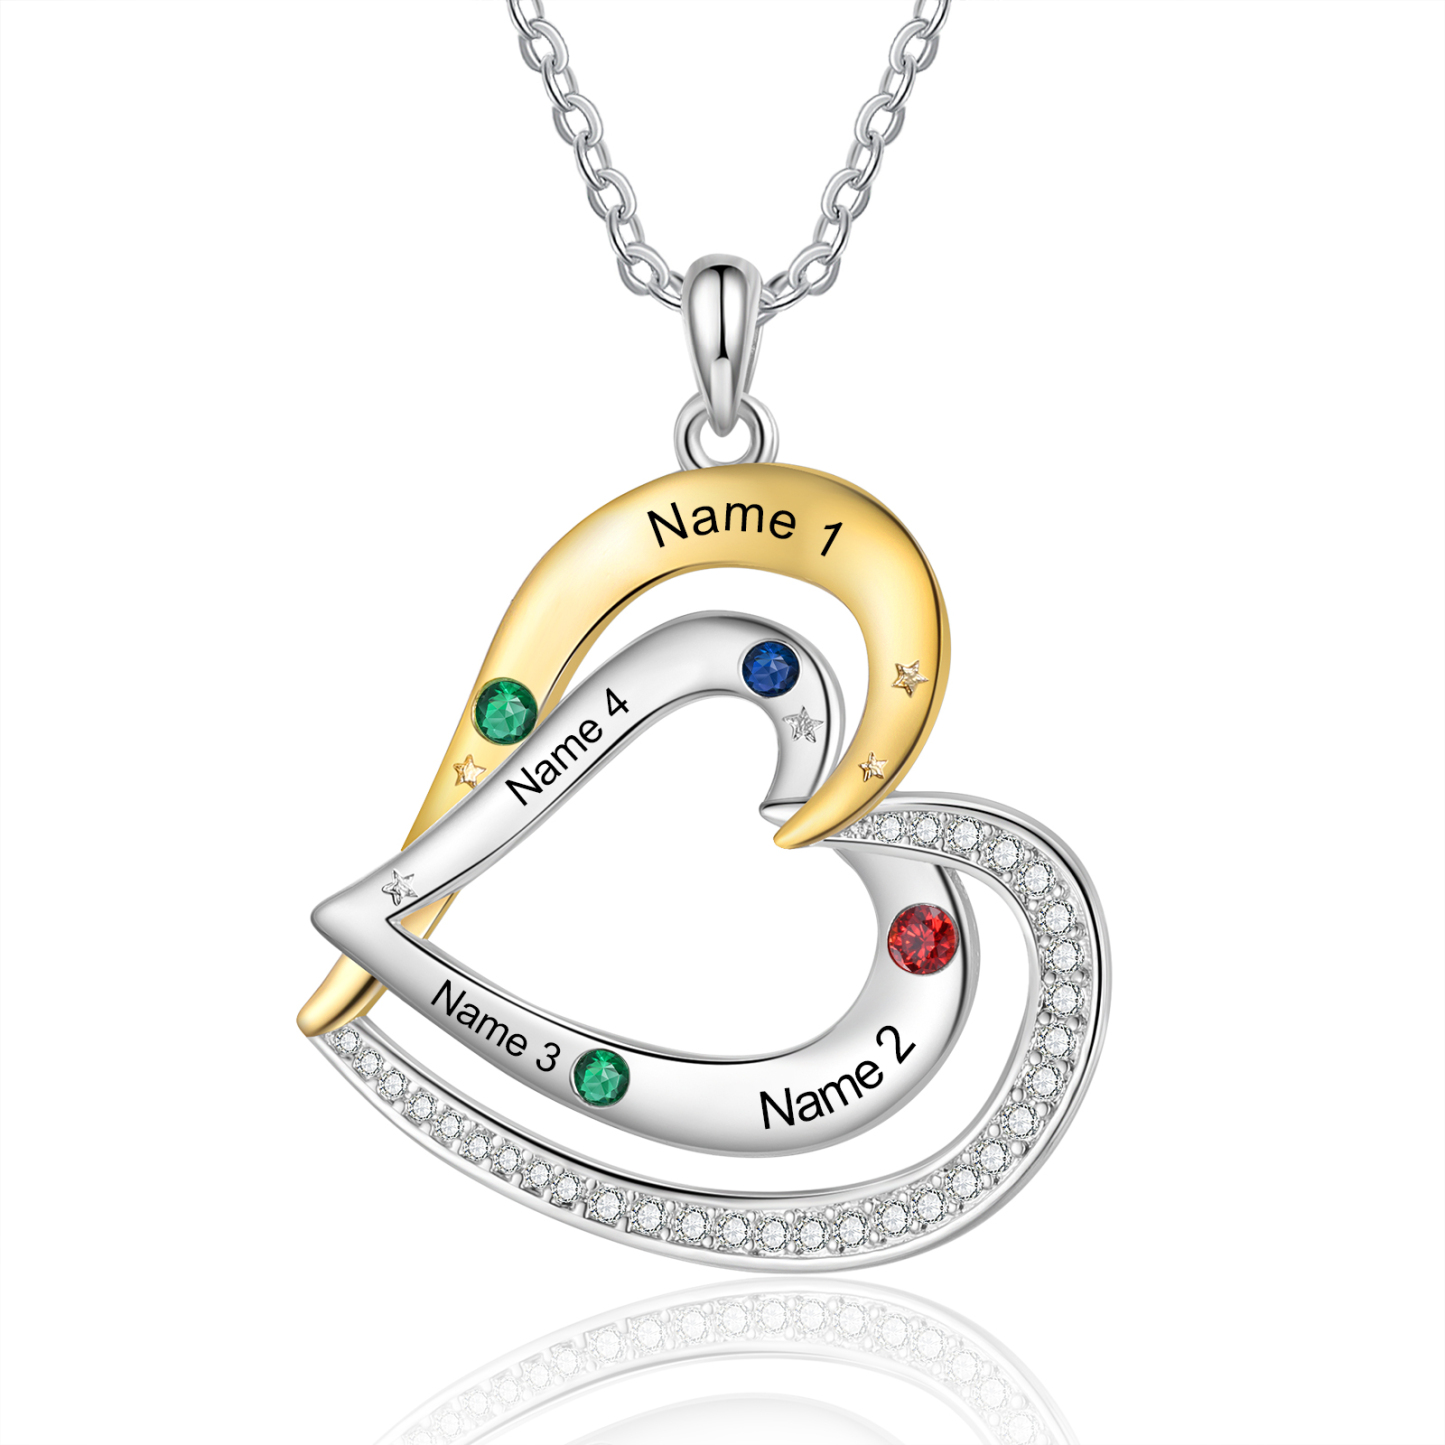 4 Names - Personalized Love Necklace with Customized Name and Birthsto